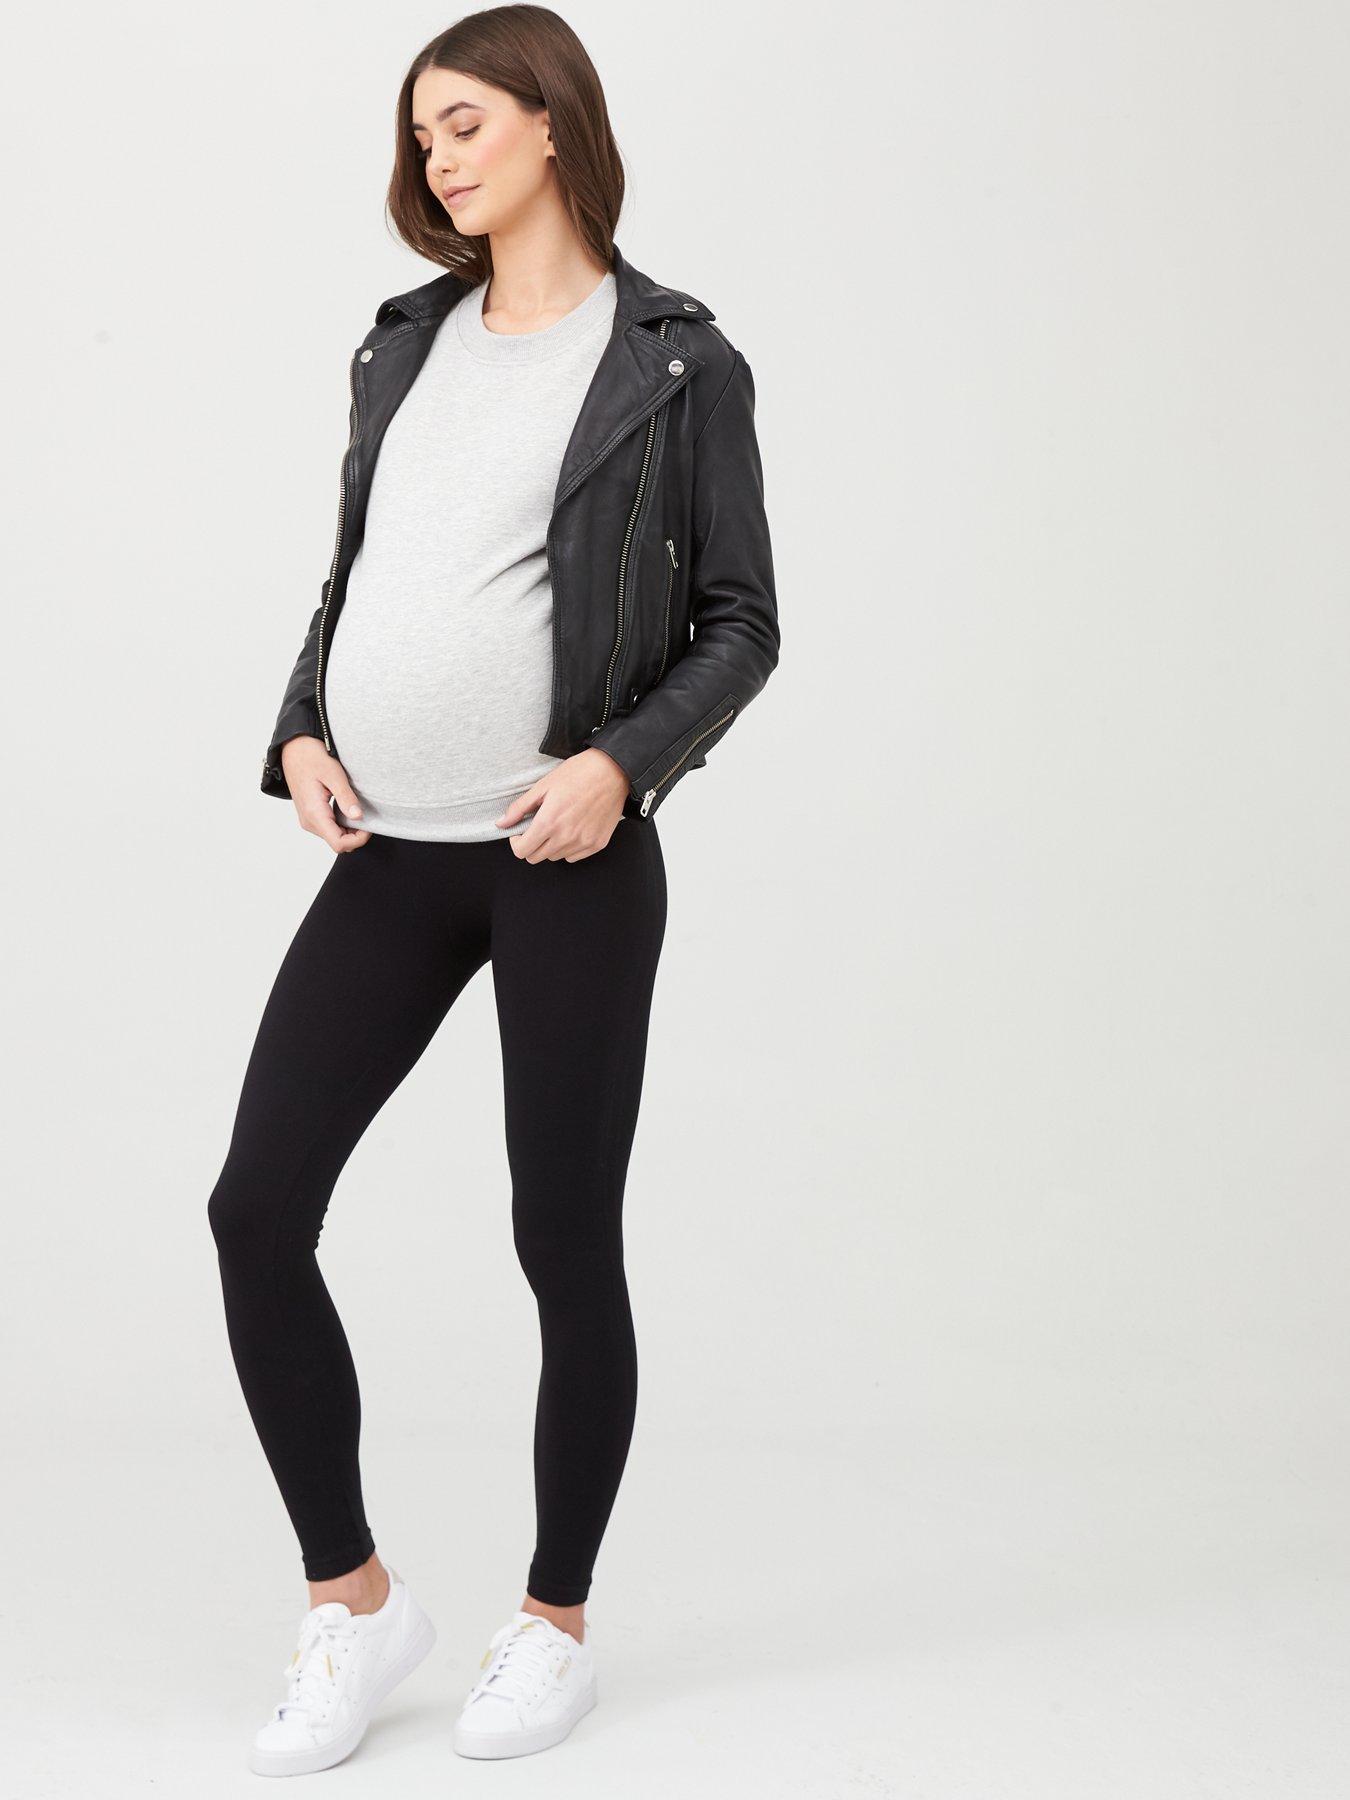 Maternity Spanx Clothing, Free Delivery